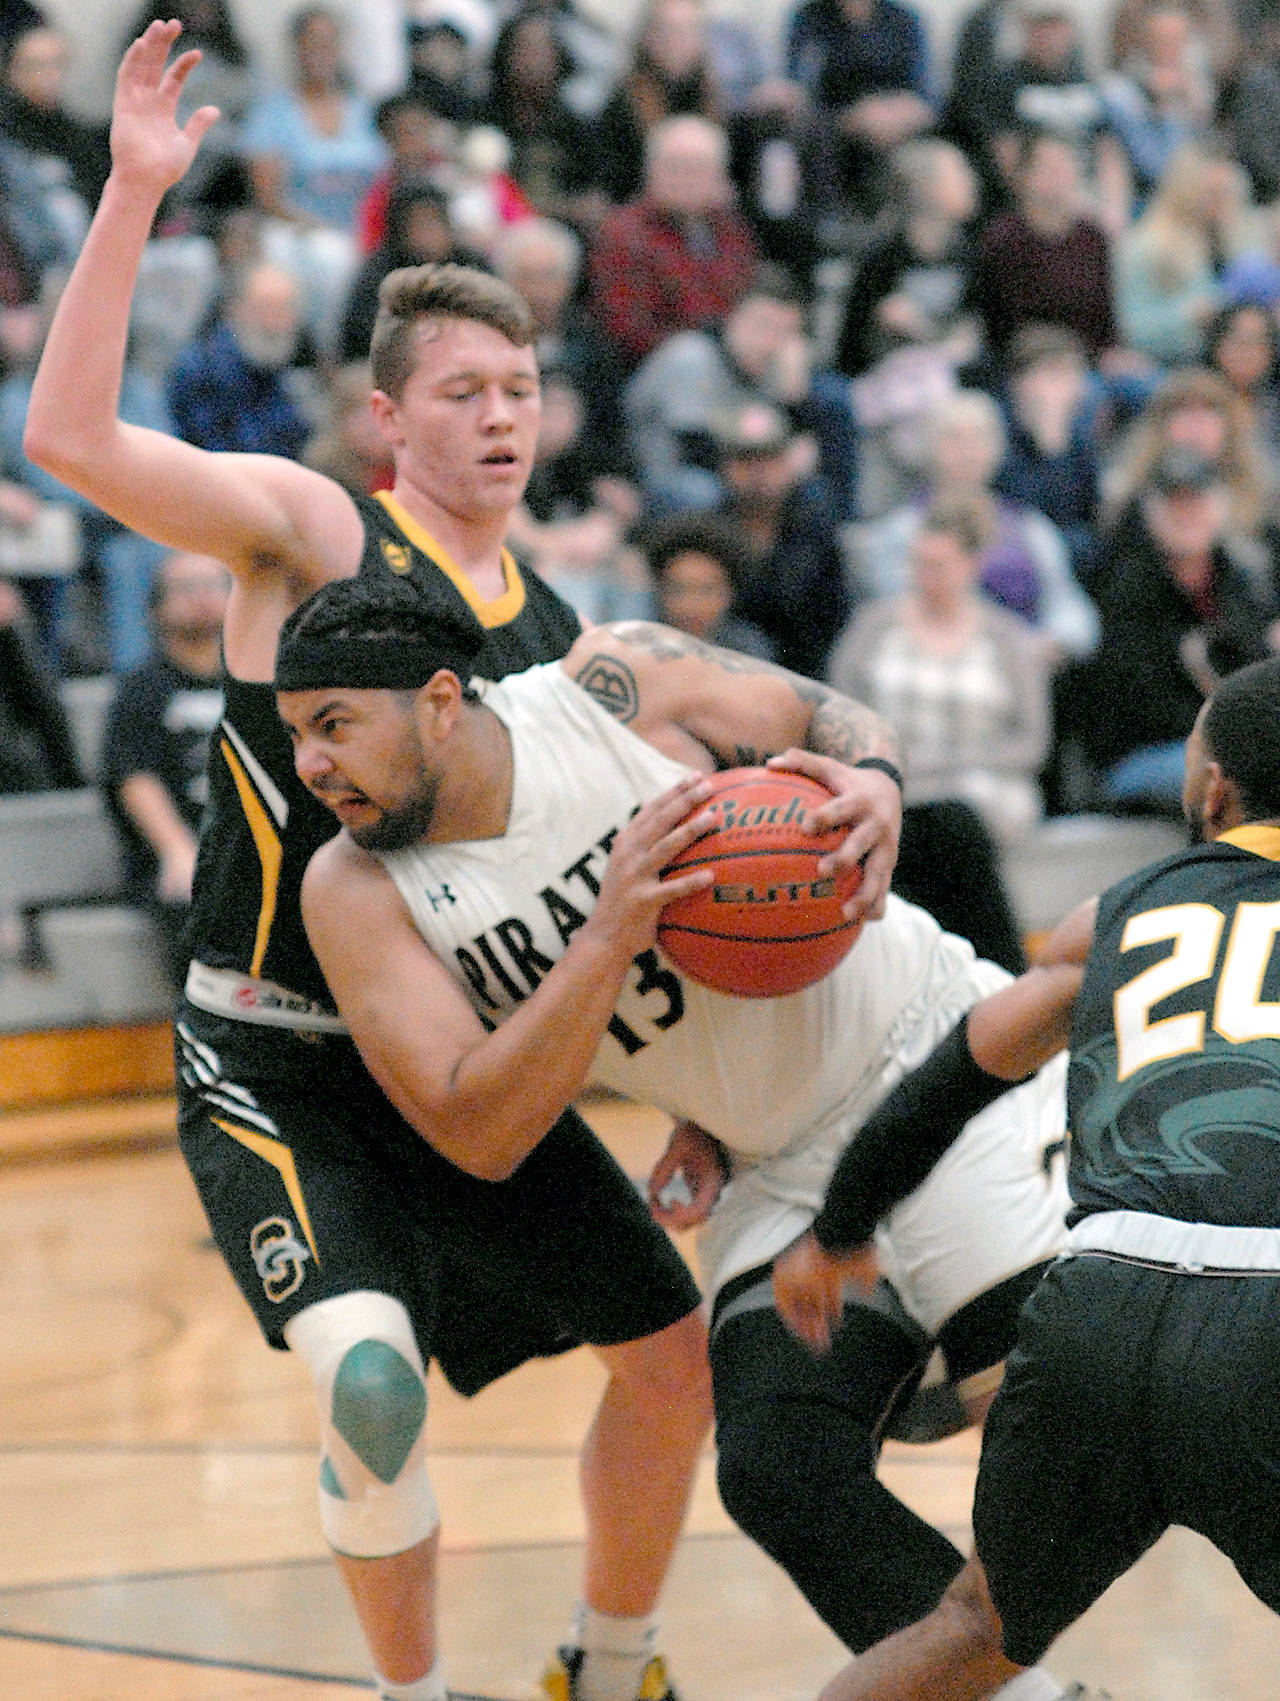 Peninsula’s Marquis Gurske, front, pushes around the defense of Shoreline’s David Perkins during Wednesday’s NWAC North Division game in Port Angeles. Looking on at right is Shoreline’s Keilyn Myers. (Keith Thorpe/Peninsula Daily News)